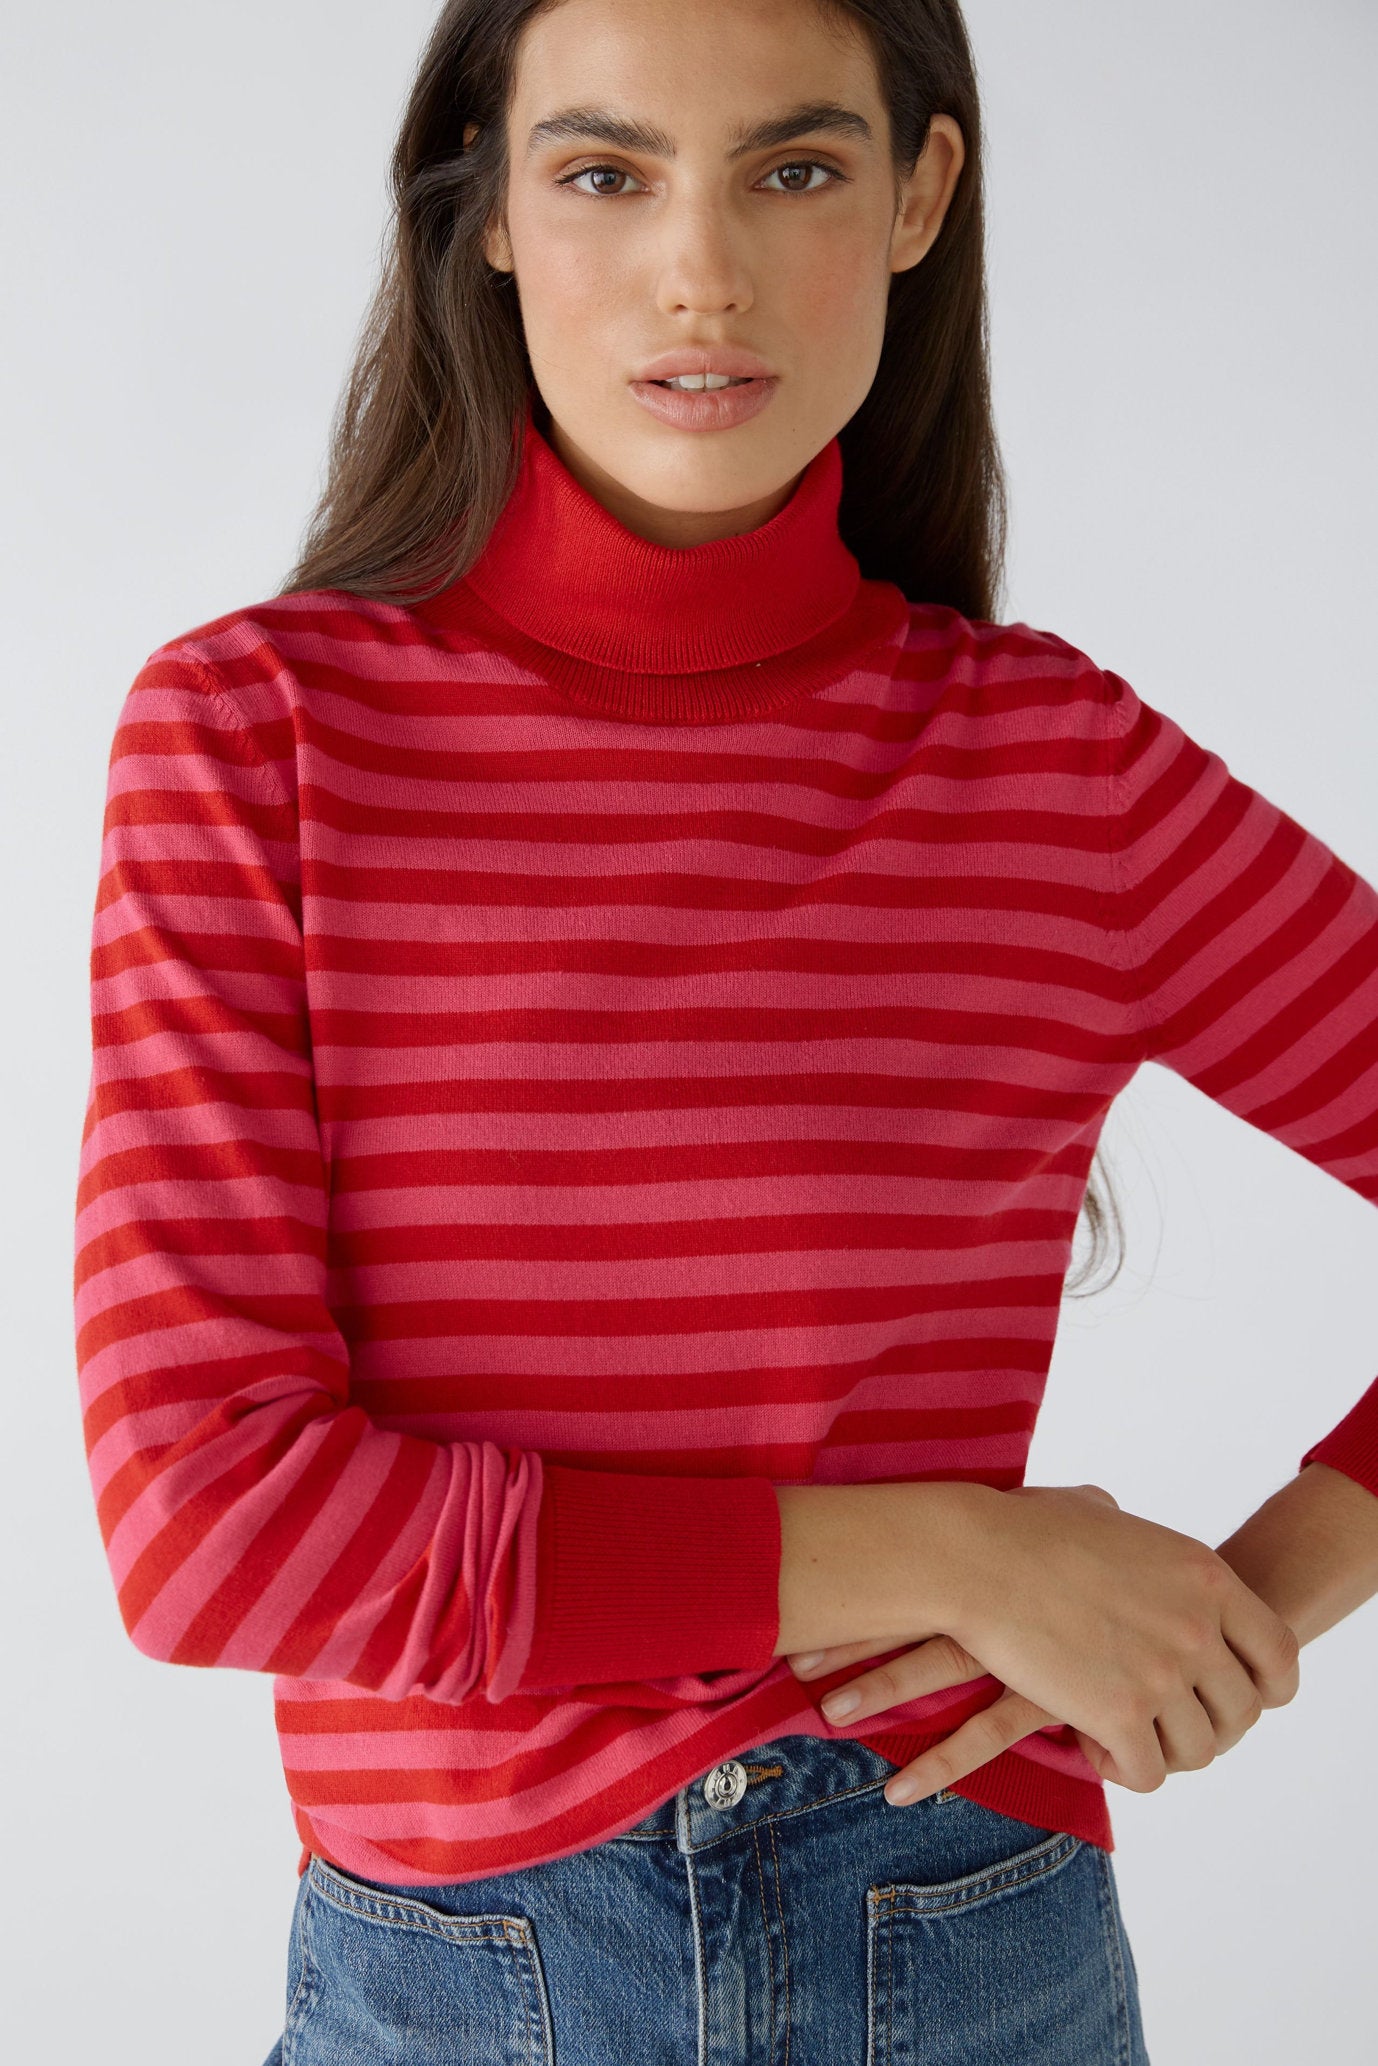 Jumper Cotton Blend With Organic Cotton_79796_0363_06